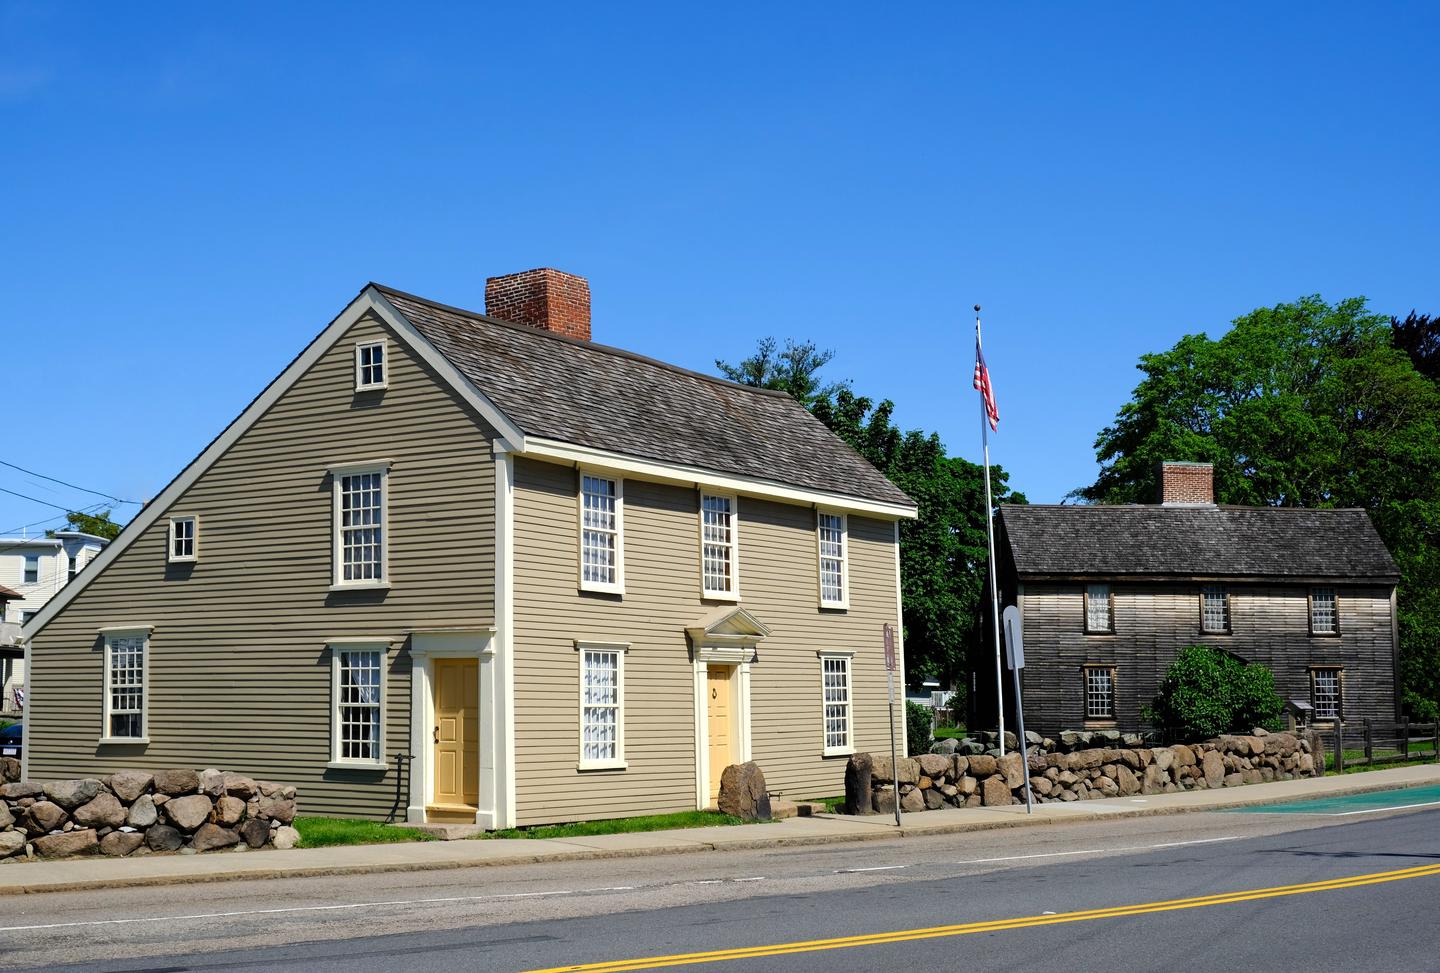 Two New England "saltbox" style homes sit next to each other. Home on left has gray siding, white trim, and beige doors. Home on right has brown wooden siding and is surrounded by trees and shrubs. Between the buildings, a United States flag flies on a flagpole. The Adams Farm at Penn's Hill is home to the John Quincy Adams Birthplace (left) and the John Adams Birthplace (right). 